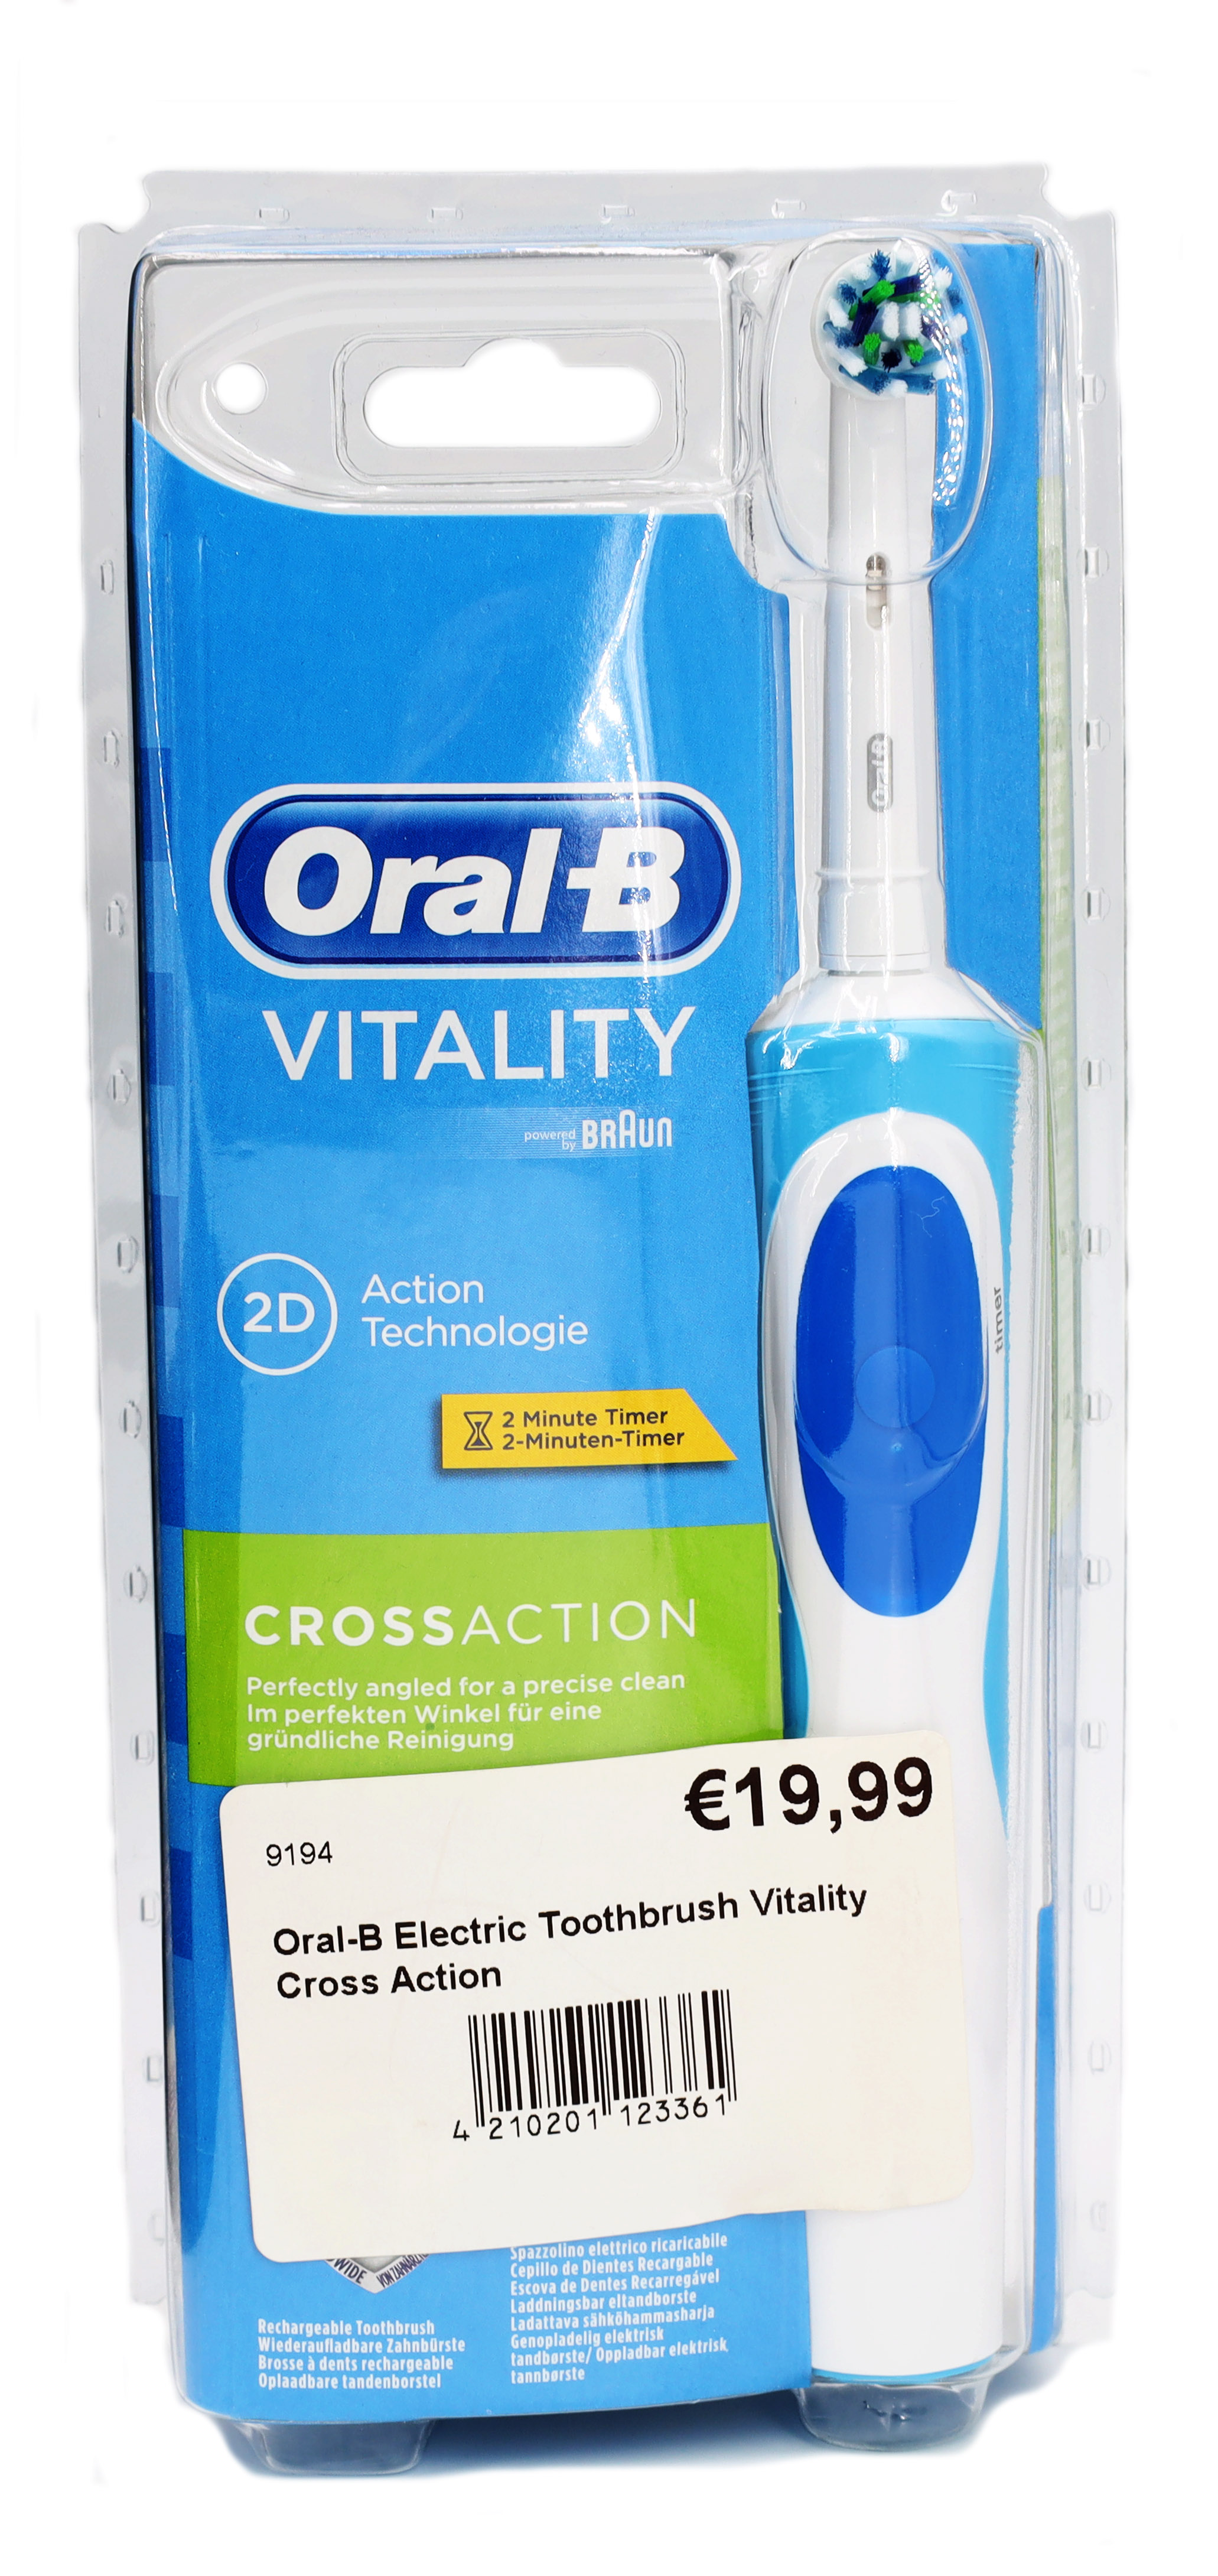 Oral-B Electric Toothbrush Vitality Cross Action